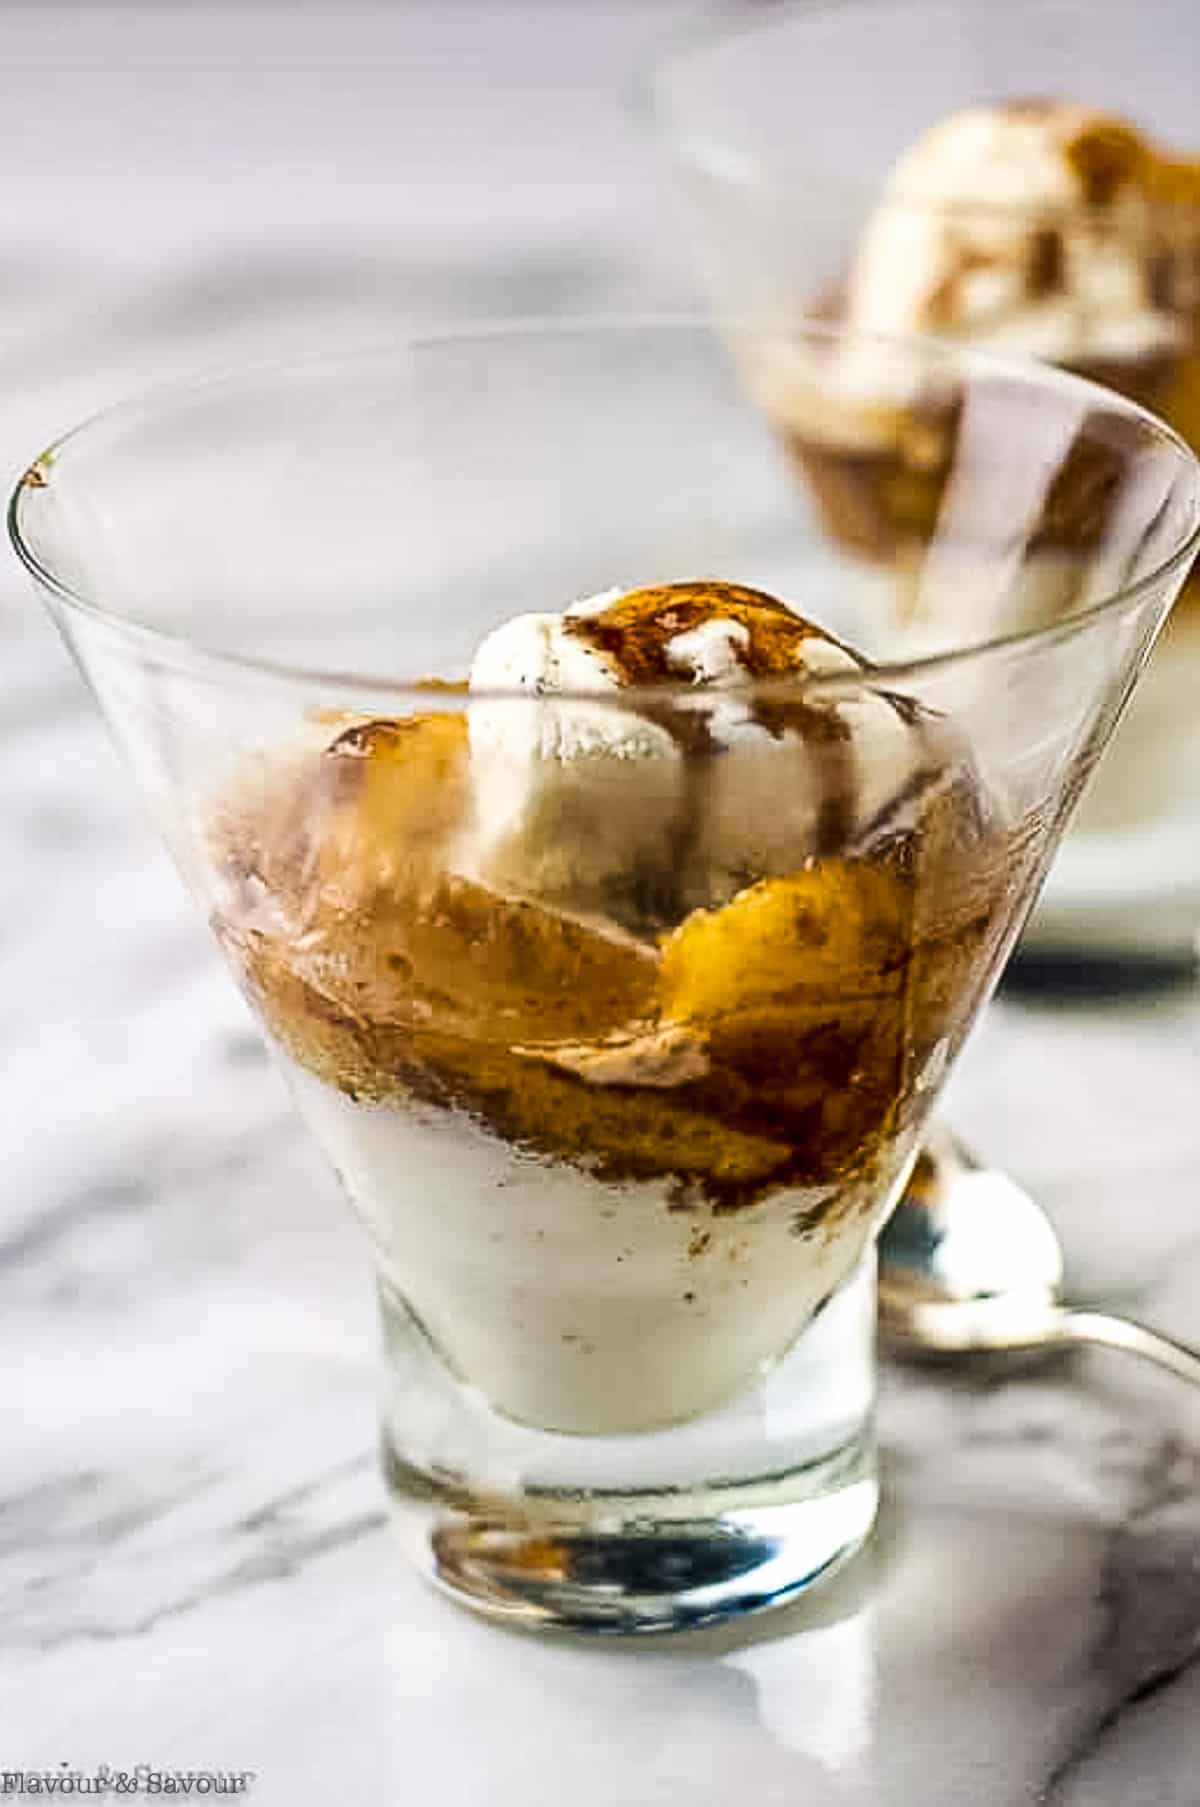 a dessert glass with bananas flambé with rum and ice cream